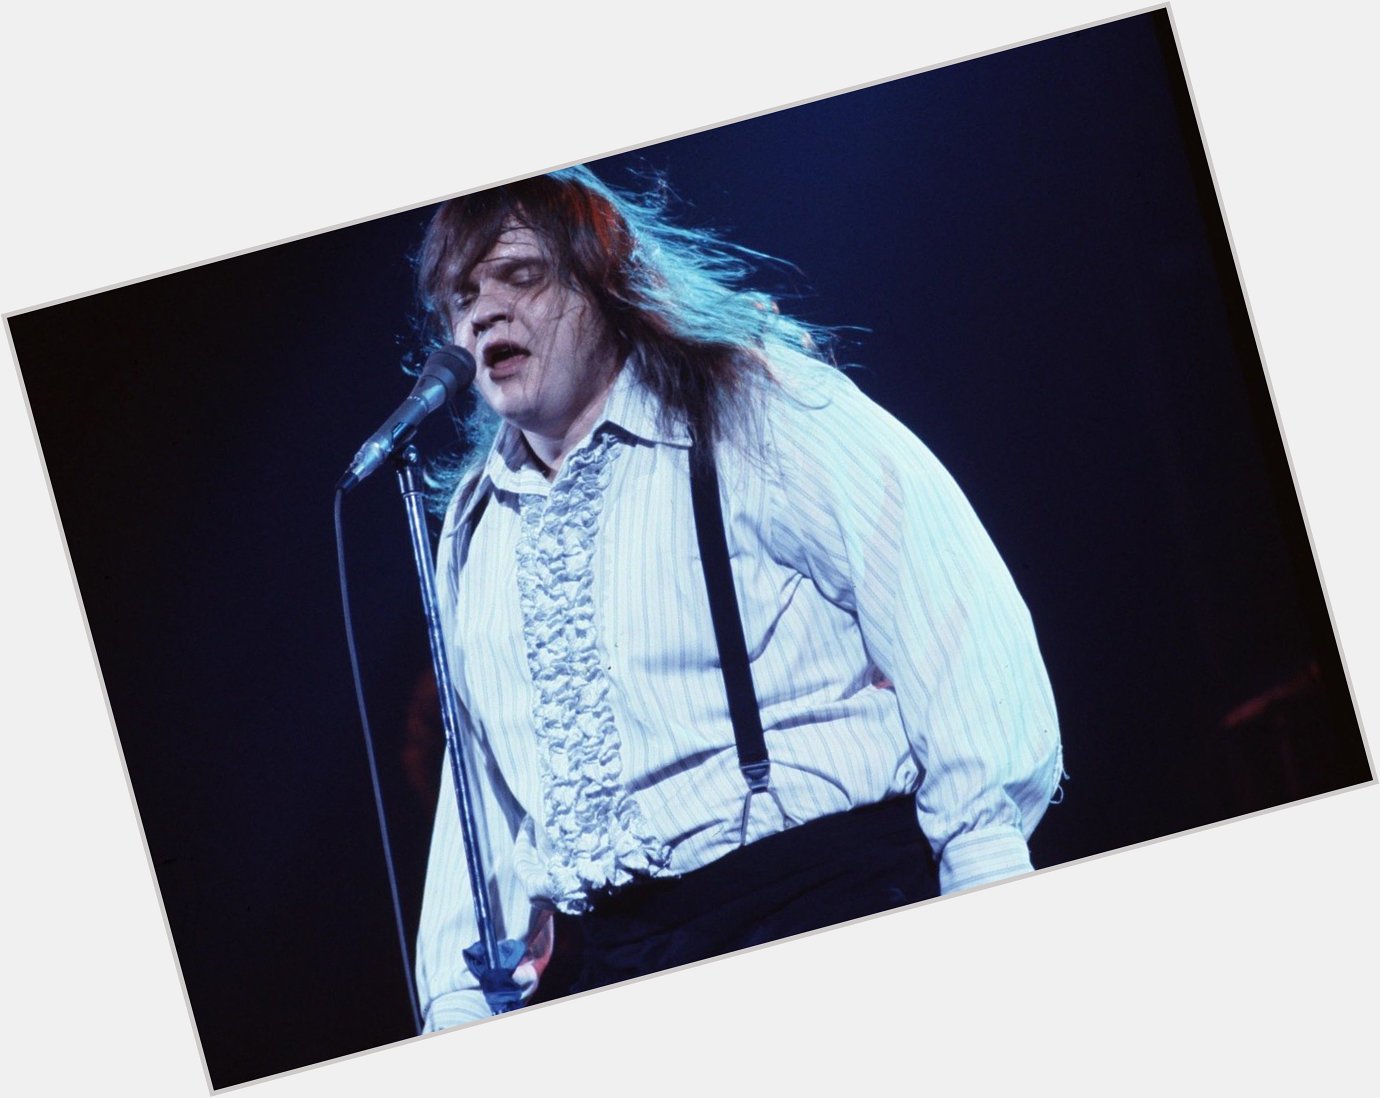 Happy birthday to American singer and actor Meat Loaf, born September 27, 1947. 